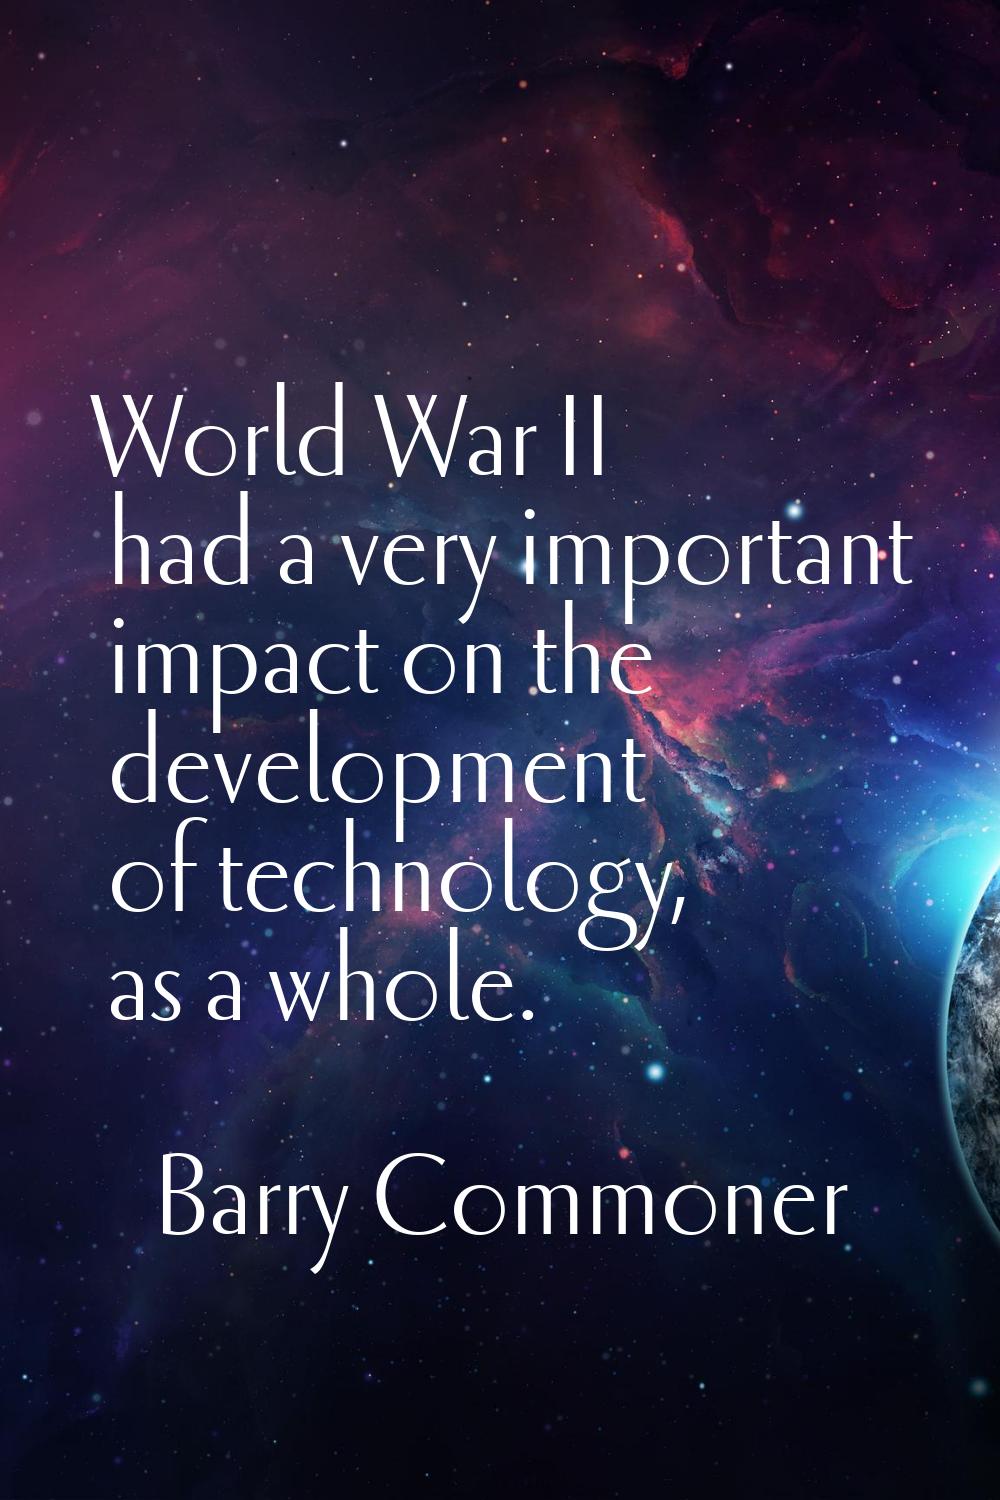 World War II had a very important impact on the development of technology, as a whole.